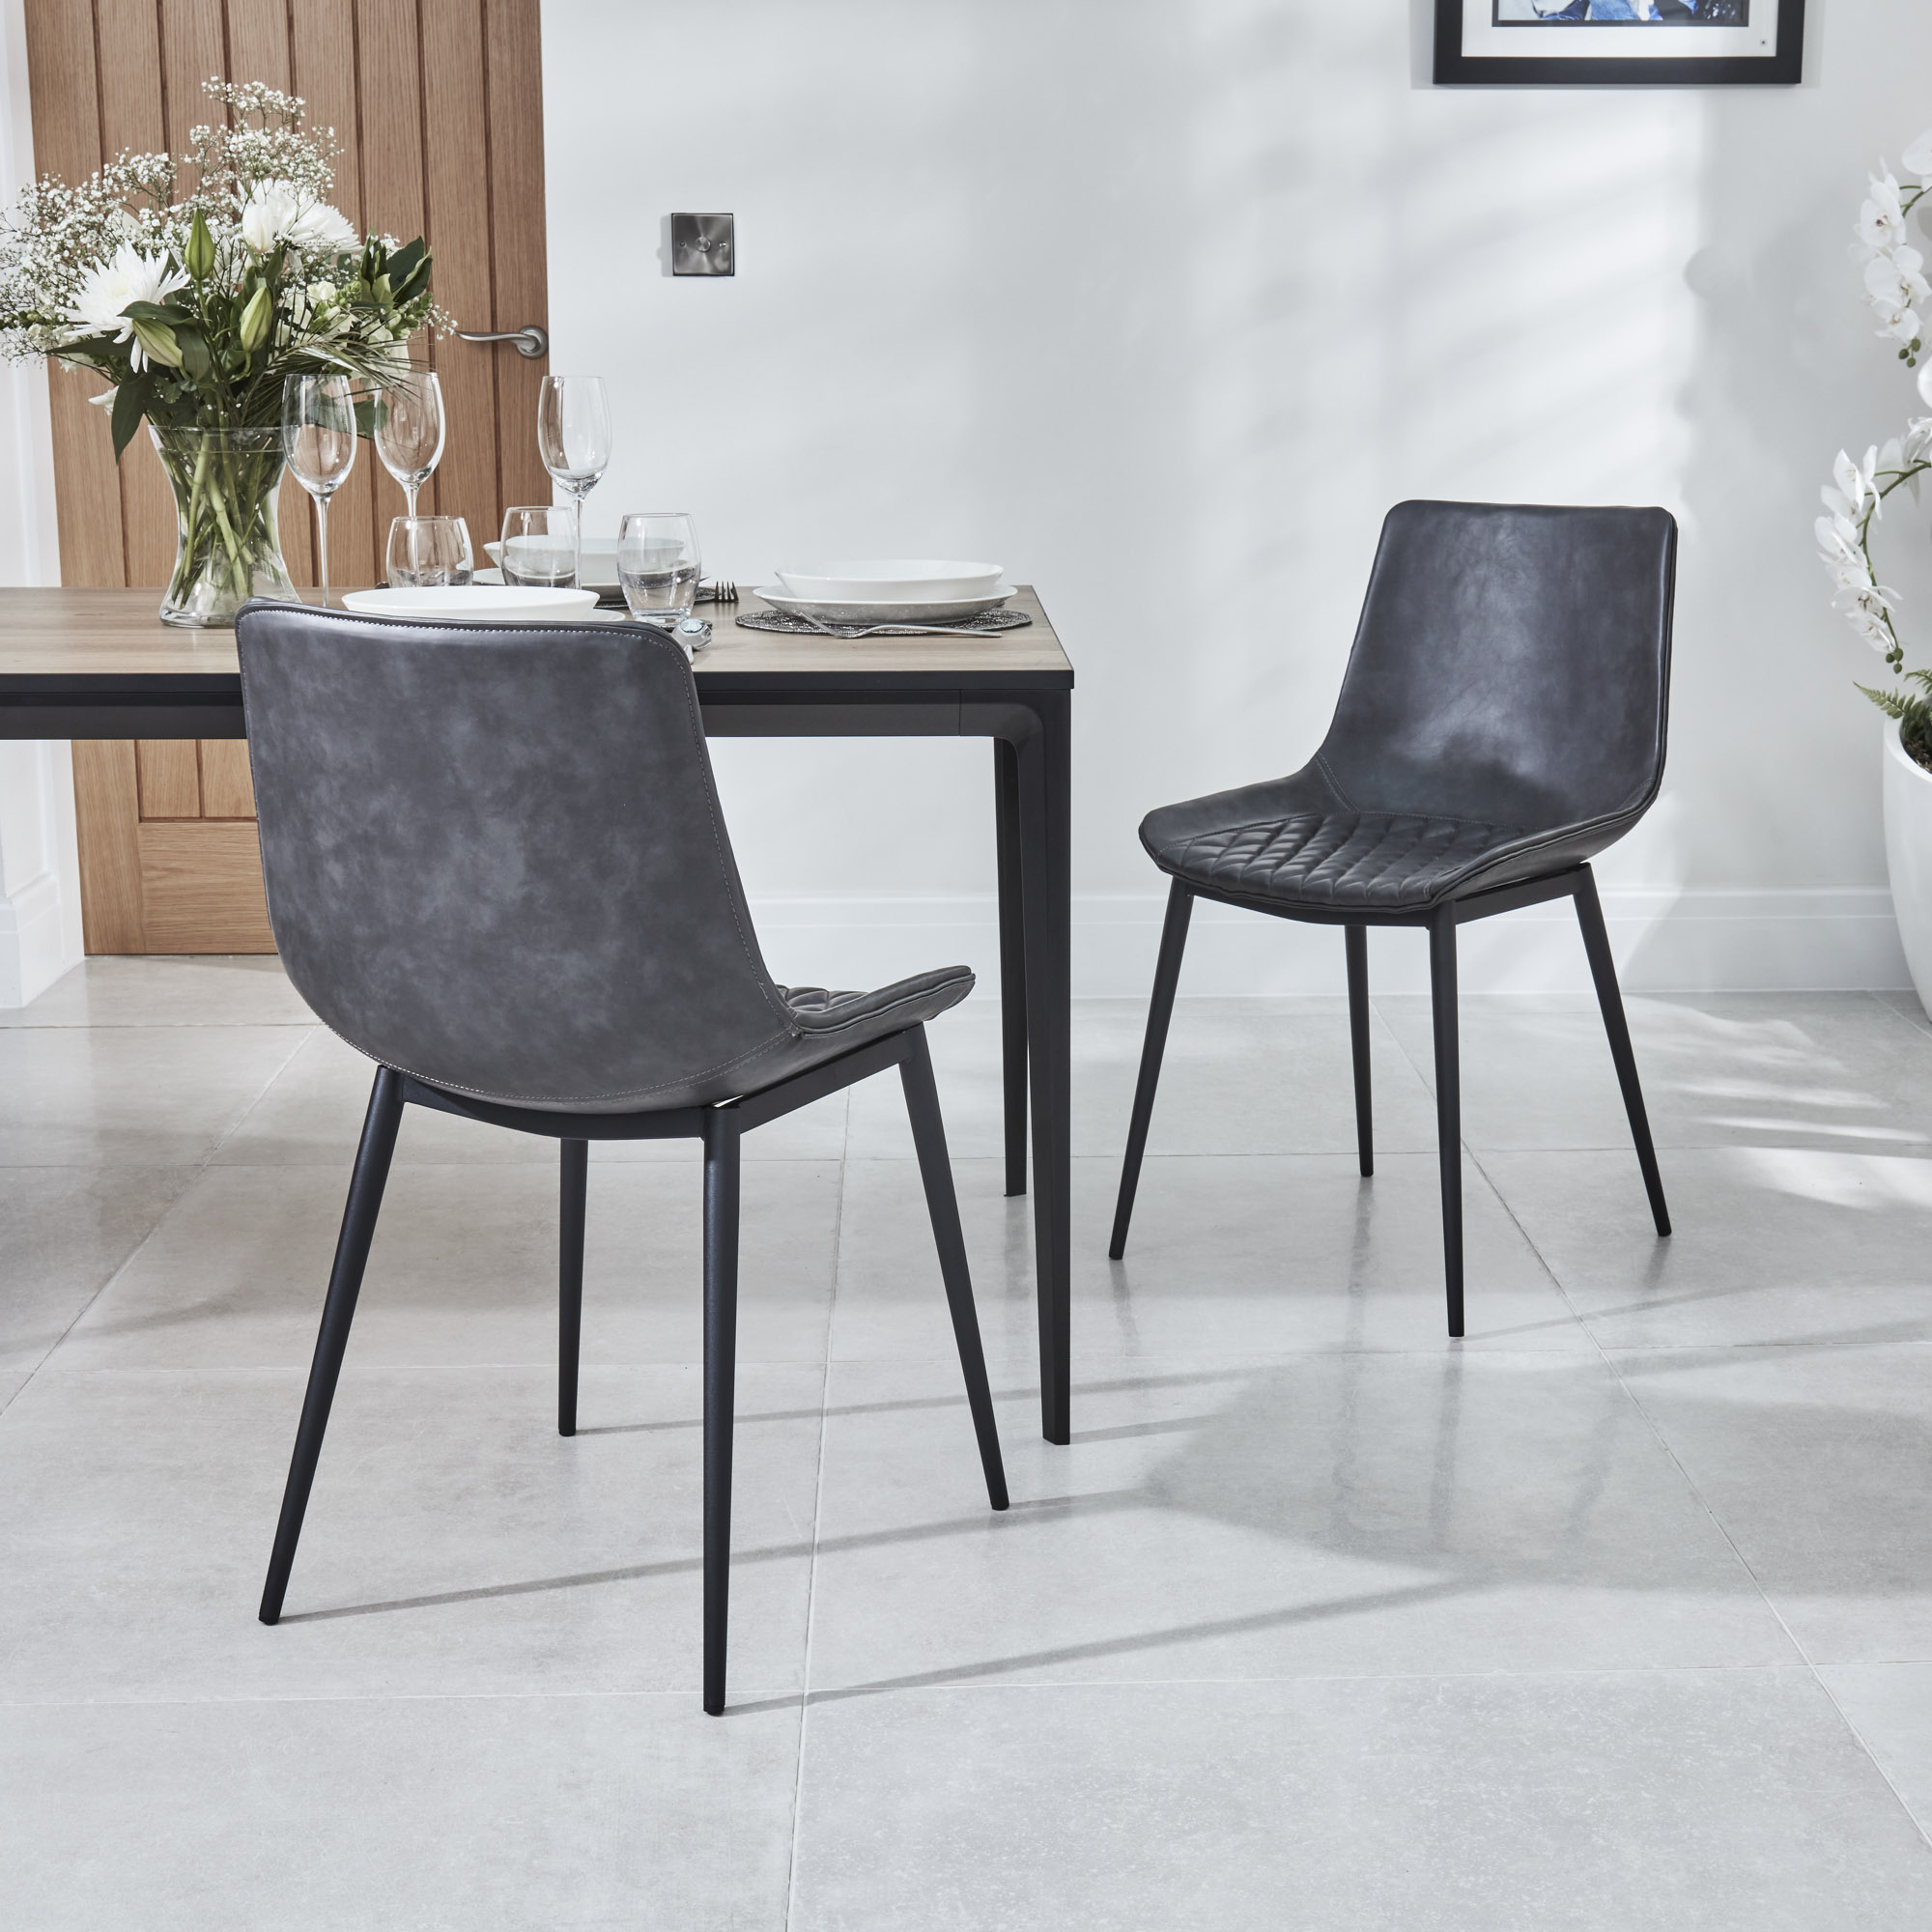 Bellagio 90cm Square Grey Sintered Stone Dining Table with 4 x Leo Grey Dining Chairs